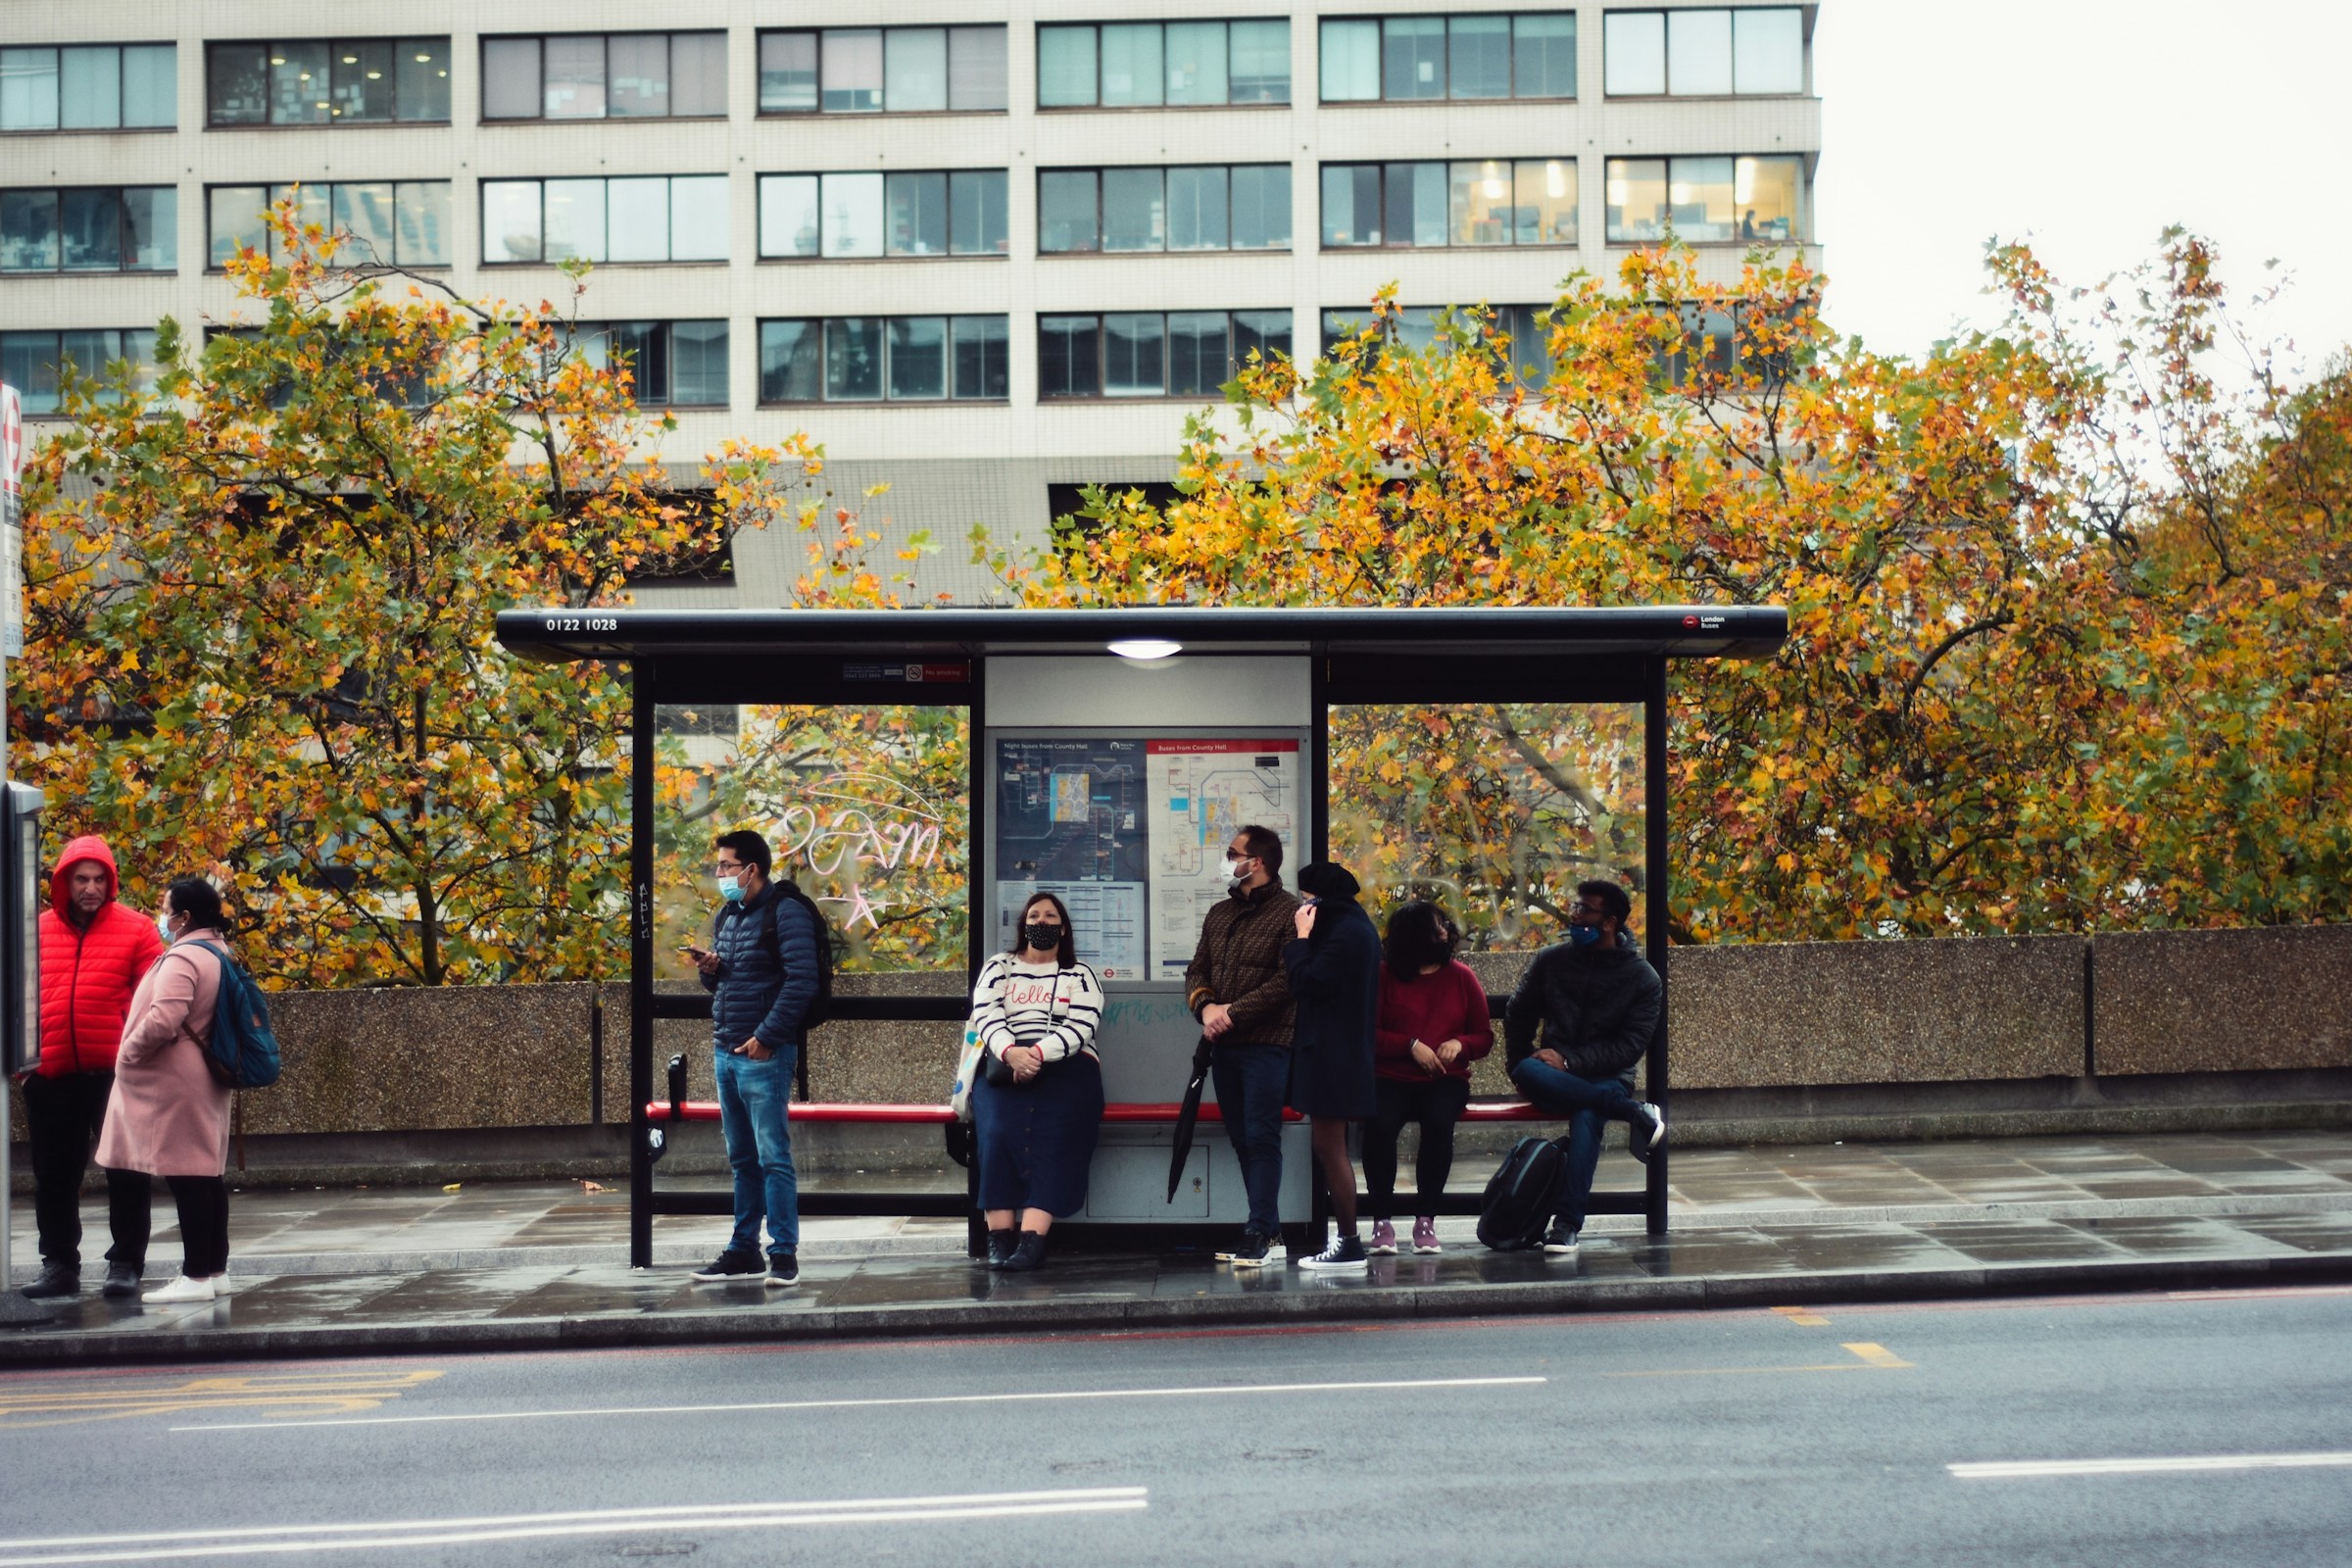 People waiting for bus at a bus stop | Source: Unsplash